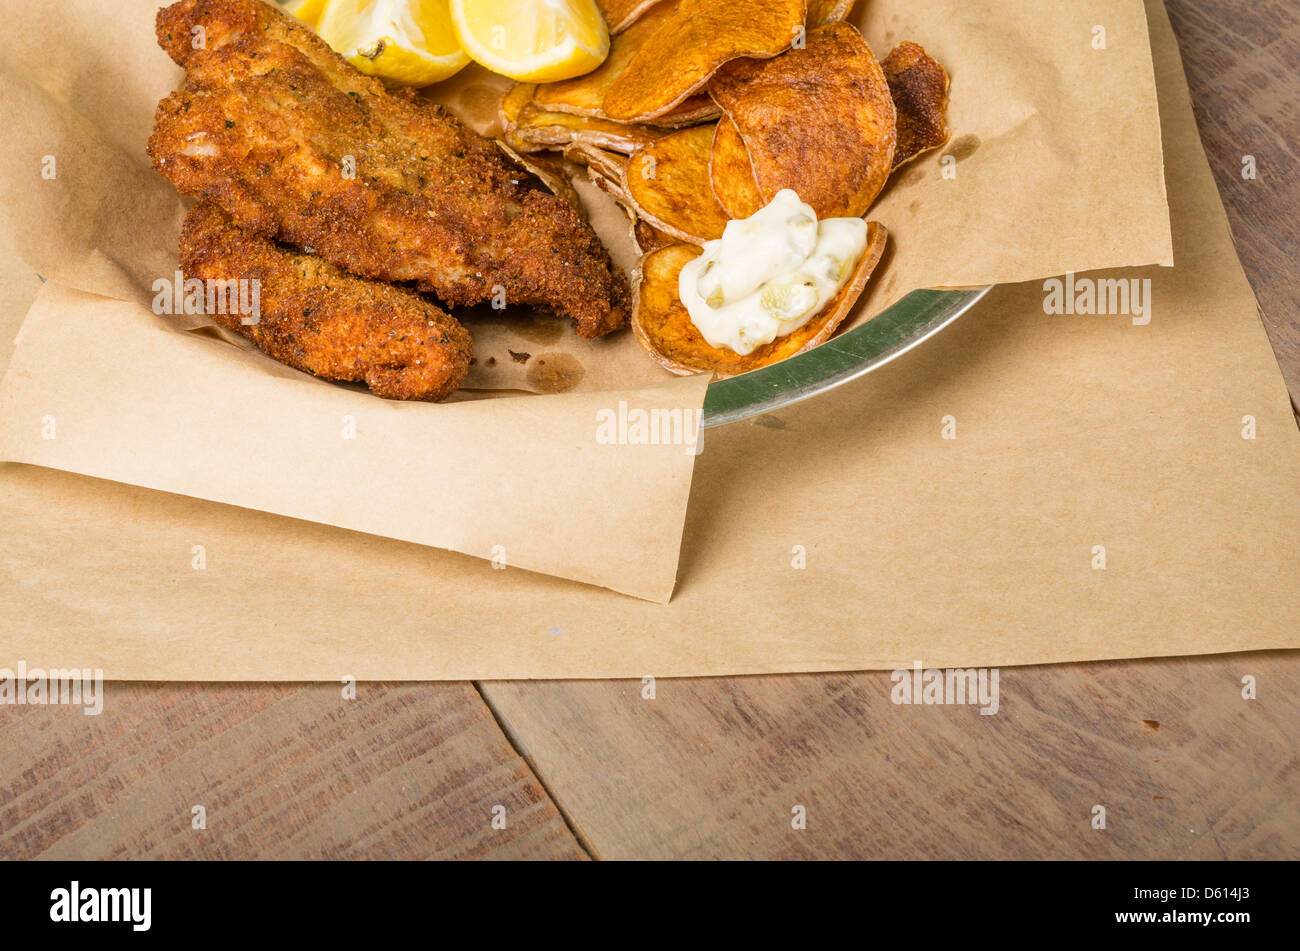 Fried fish and chips with lemon on a wooden table Stock Photo